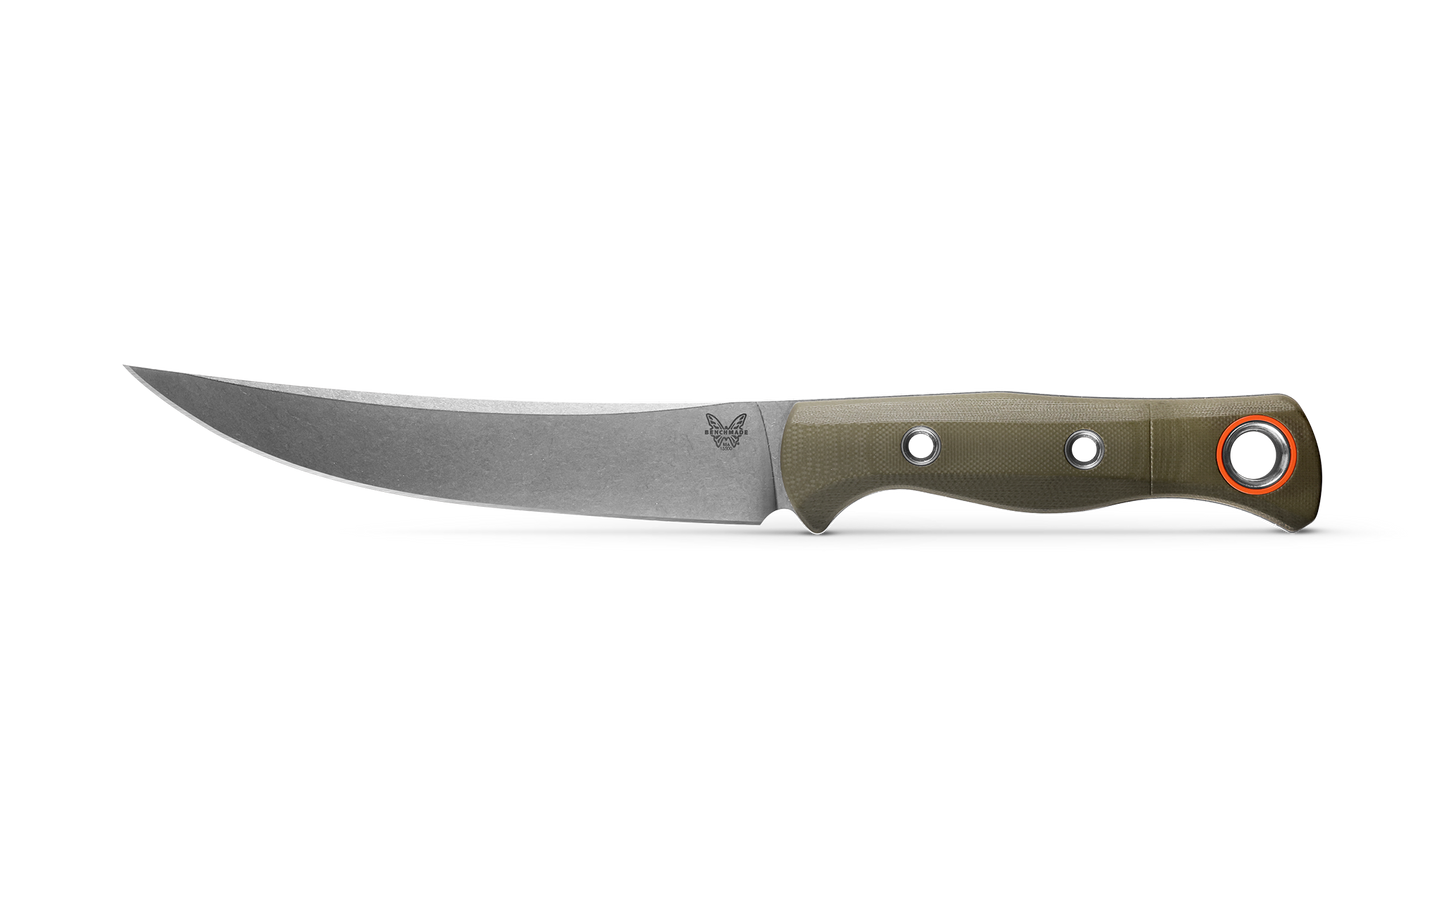 15500-3 Hunt Meatcrafter Fixed Blade Knife 6.08" CPM-S45VN Stonewashed Trailing Point, OD Green G10 Handles, Boltaron Sheath